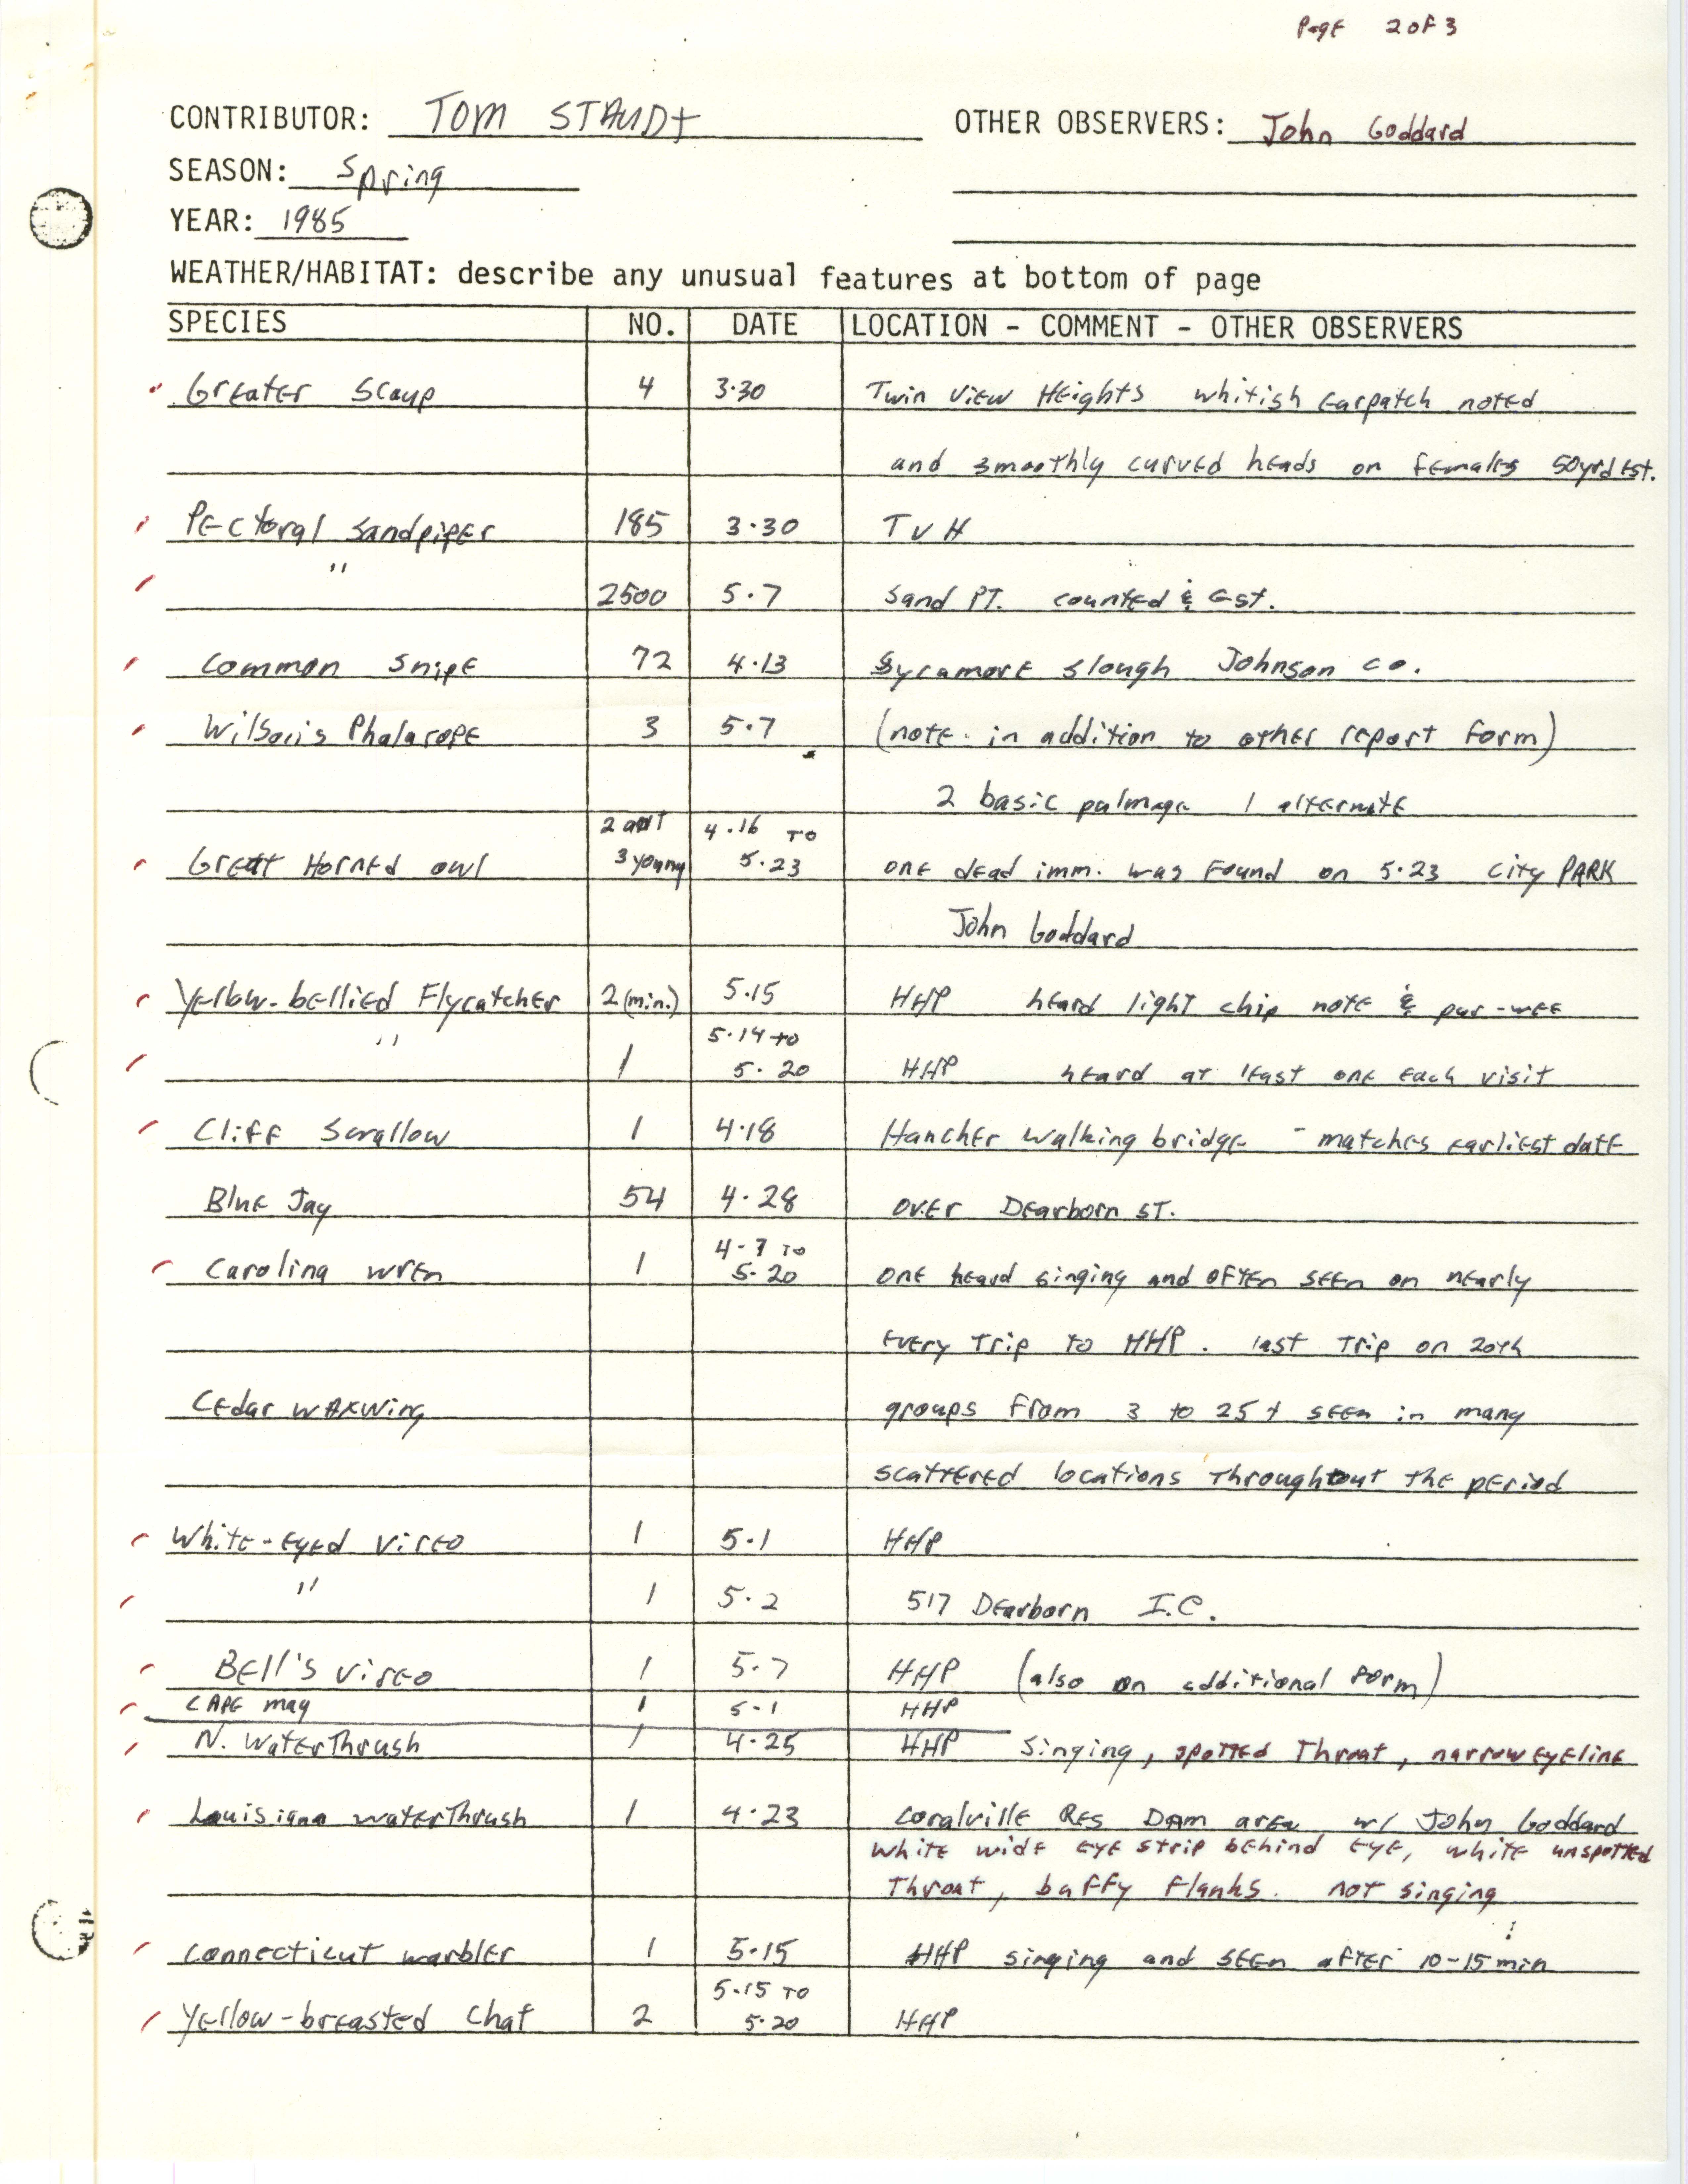 Field notes contributed by Tom Staudt, spring 1985